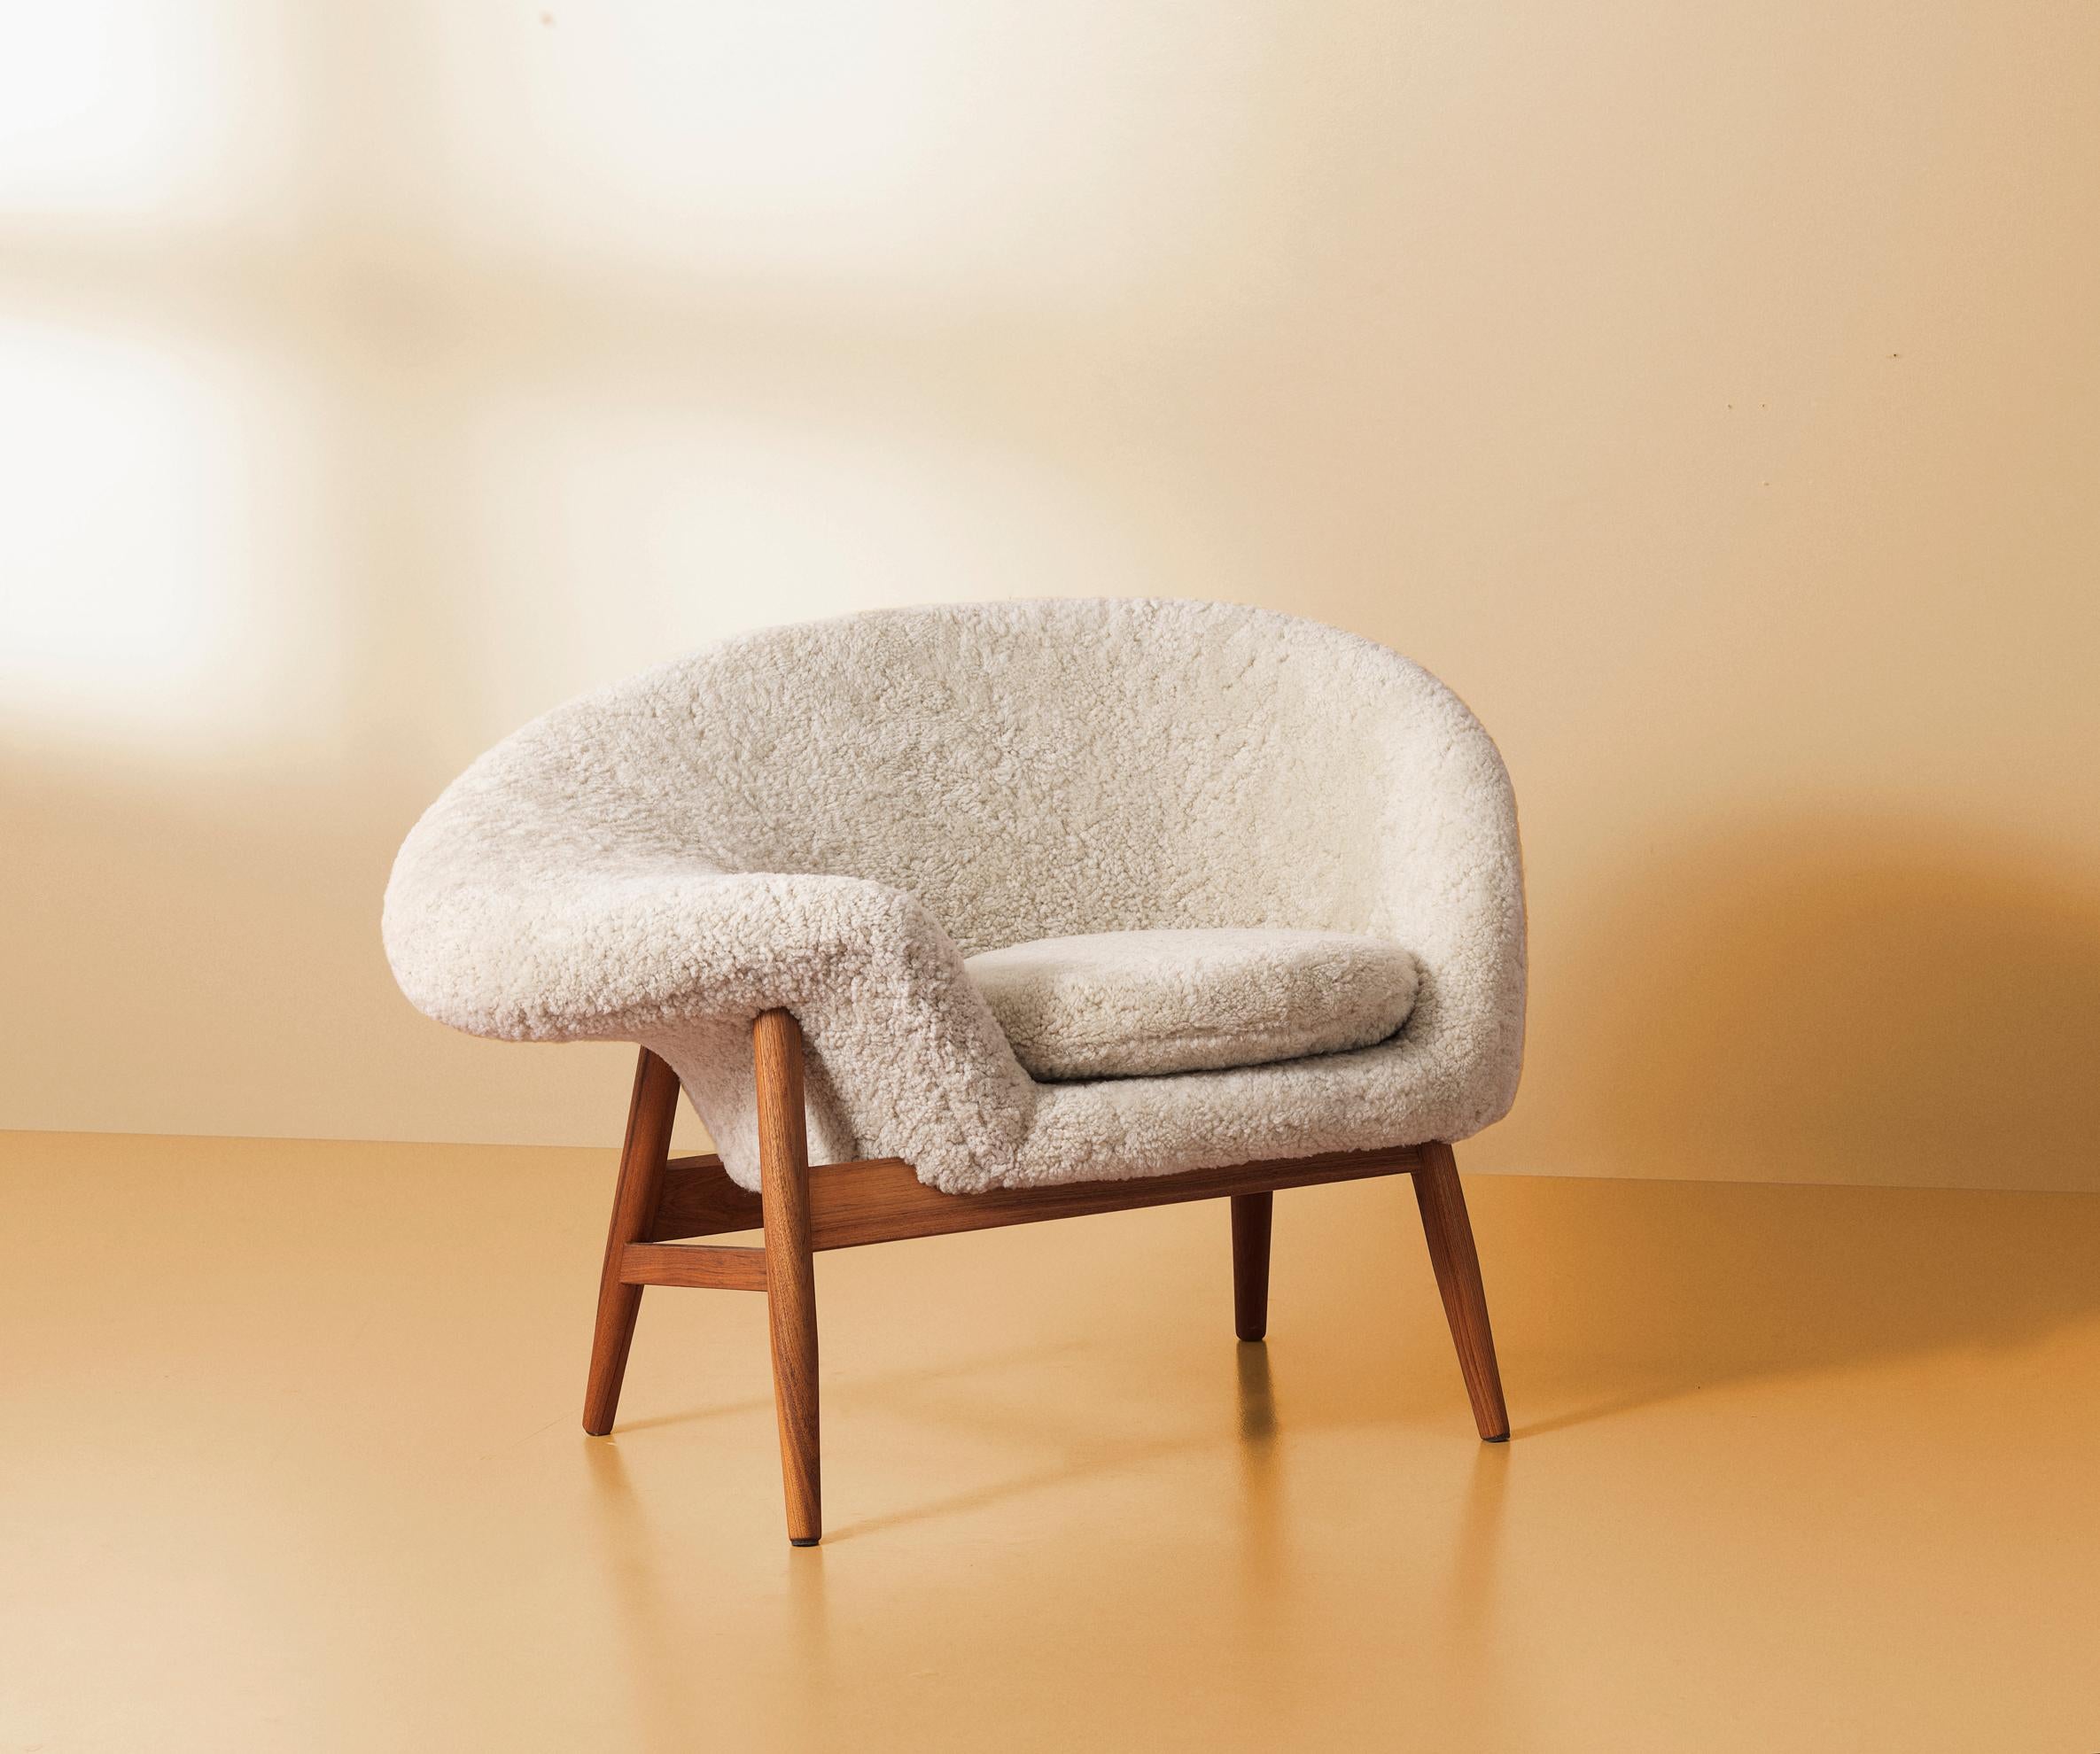 Portuguese Fried Egg Chair Sheep Chair, by Hans Olsen from Warm Nordic For Sale